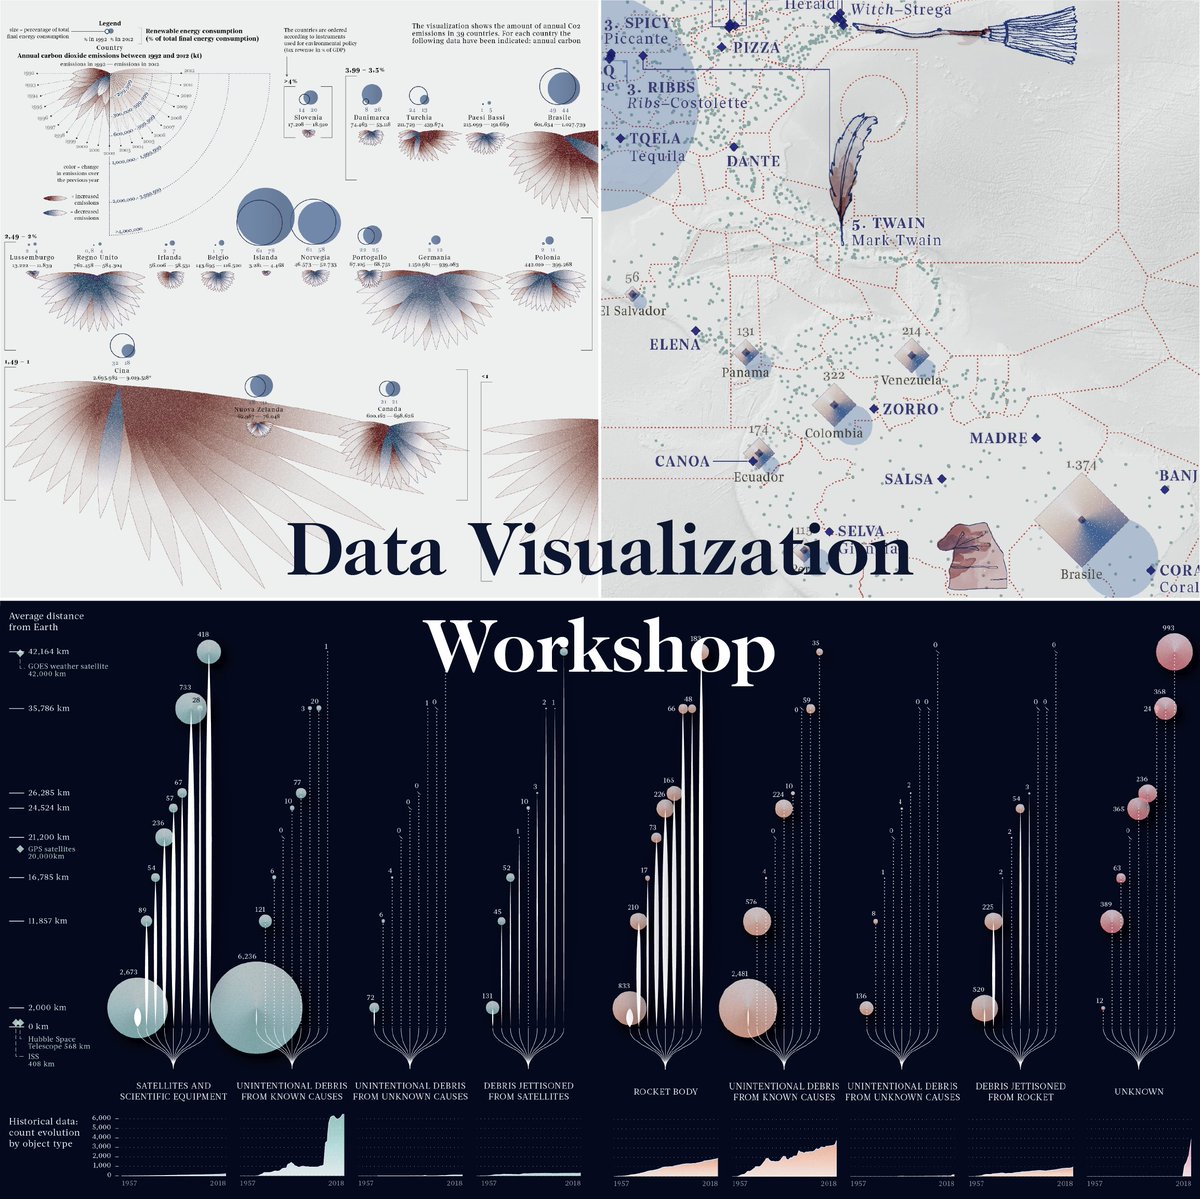 I have a new online data visualization workshop planned! March 20 & 21 (1:30pm-4:30pm CET), you can find all the information here: graphichunters.nl/finding-elegan…. Organized by @GraphicHunters #datavisualization #dataviz #infographics